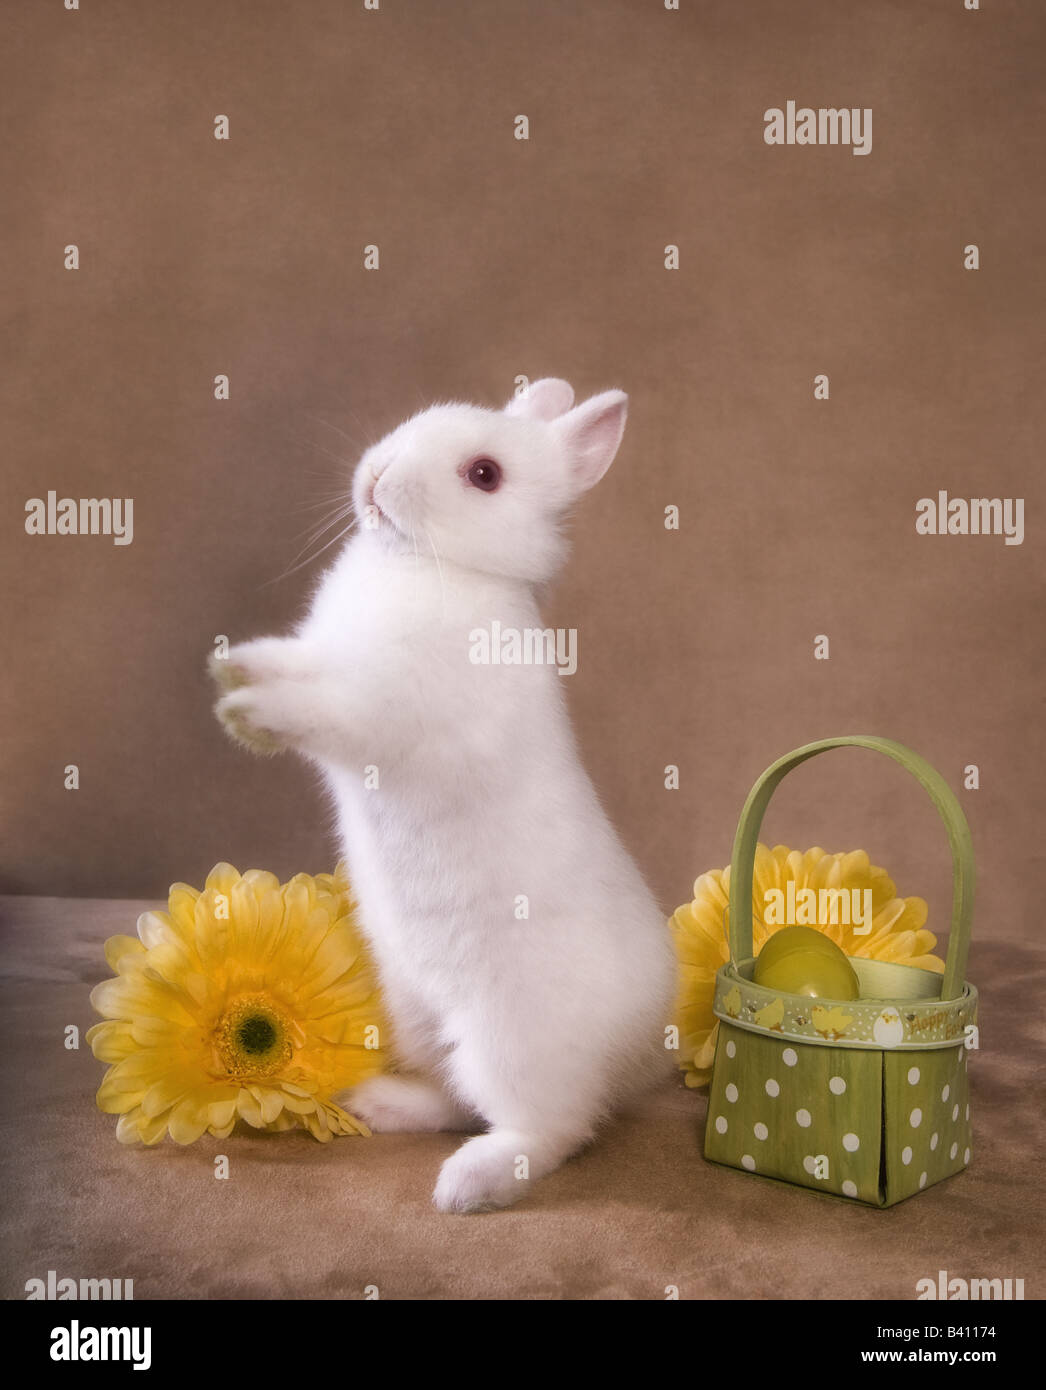 Cute white Netherland Dwarf rabbit on golden background with yellow gerber daisy flowers and Easter basket Stock Photo